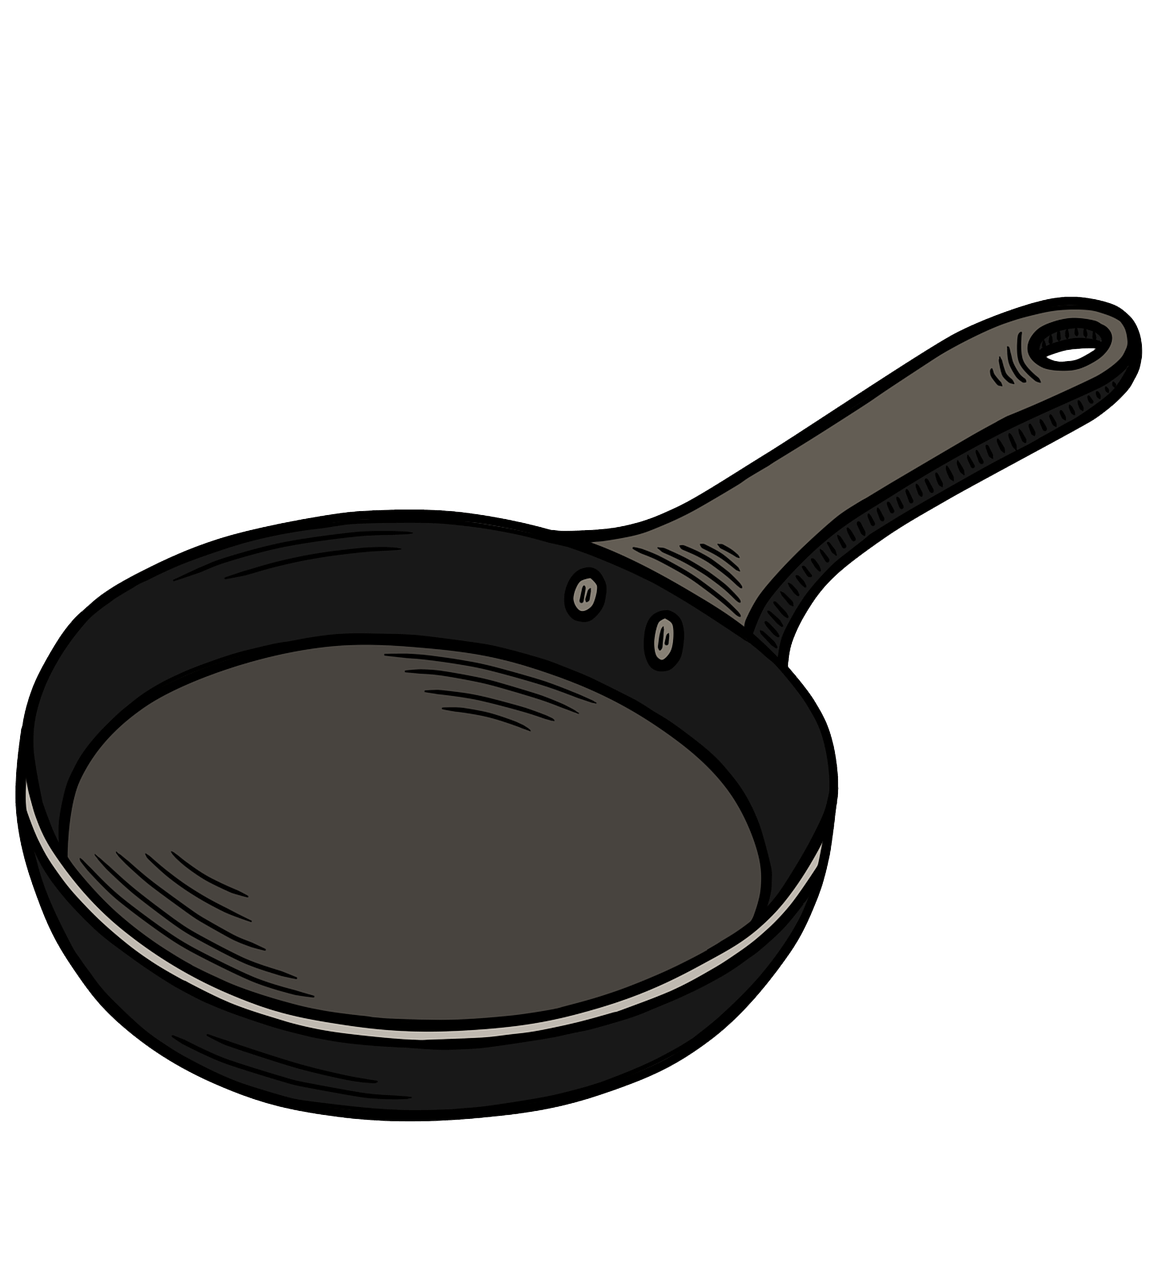 What Is The Difference Between Anodized Aluminum And Regular Aluminum Cookware?